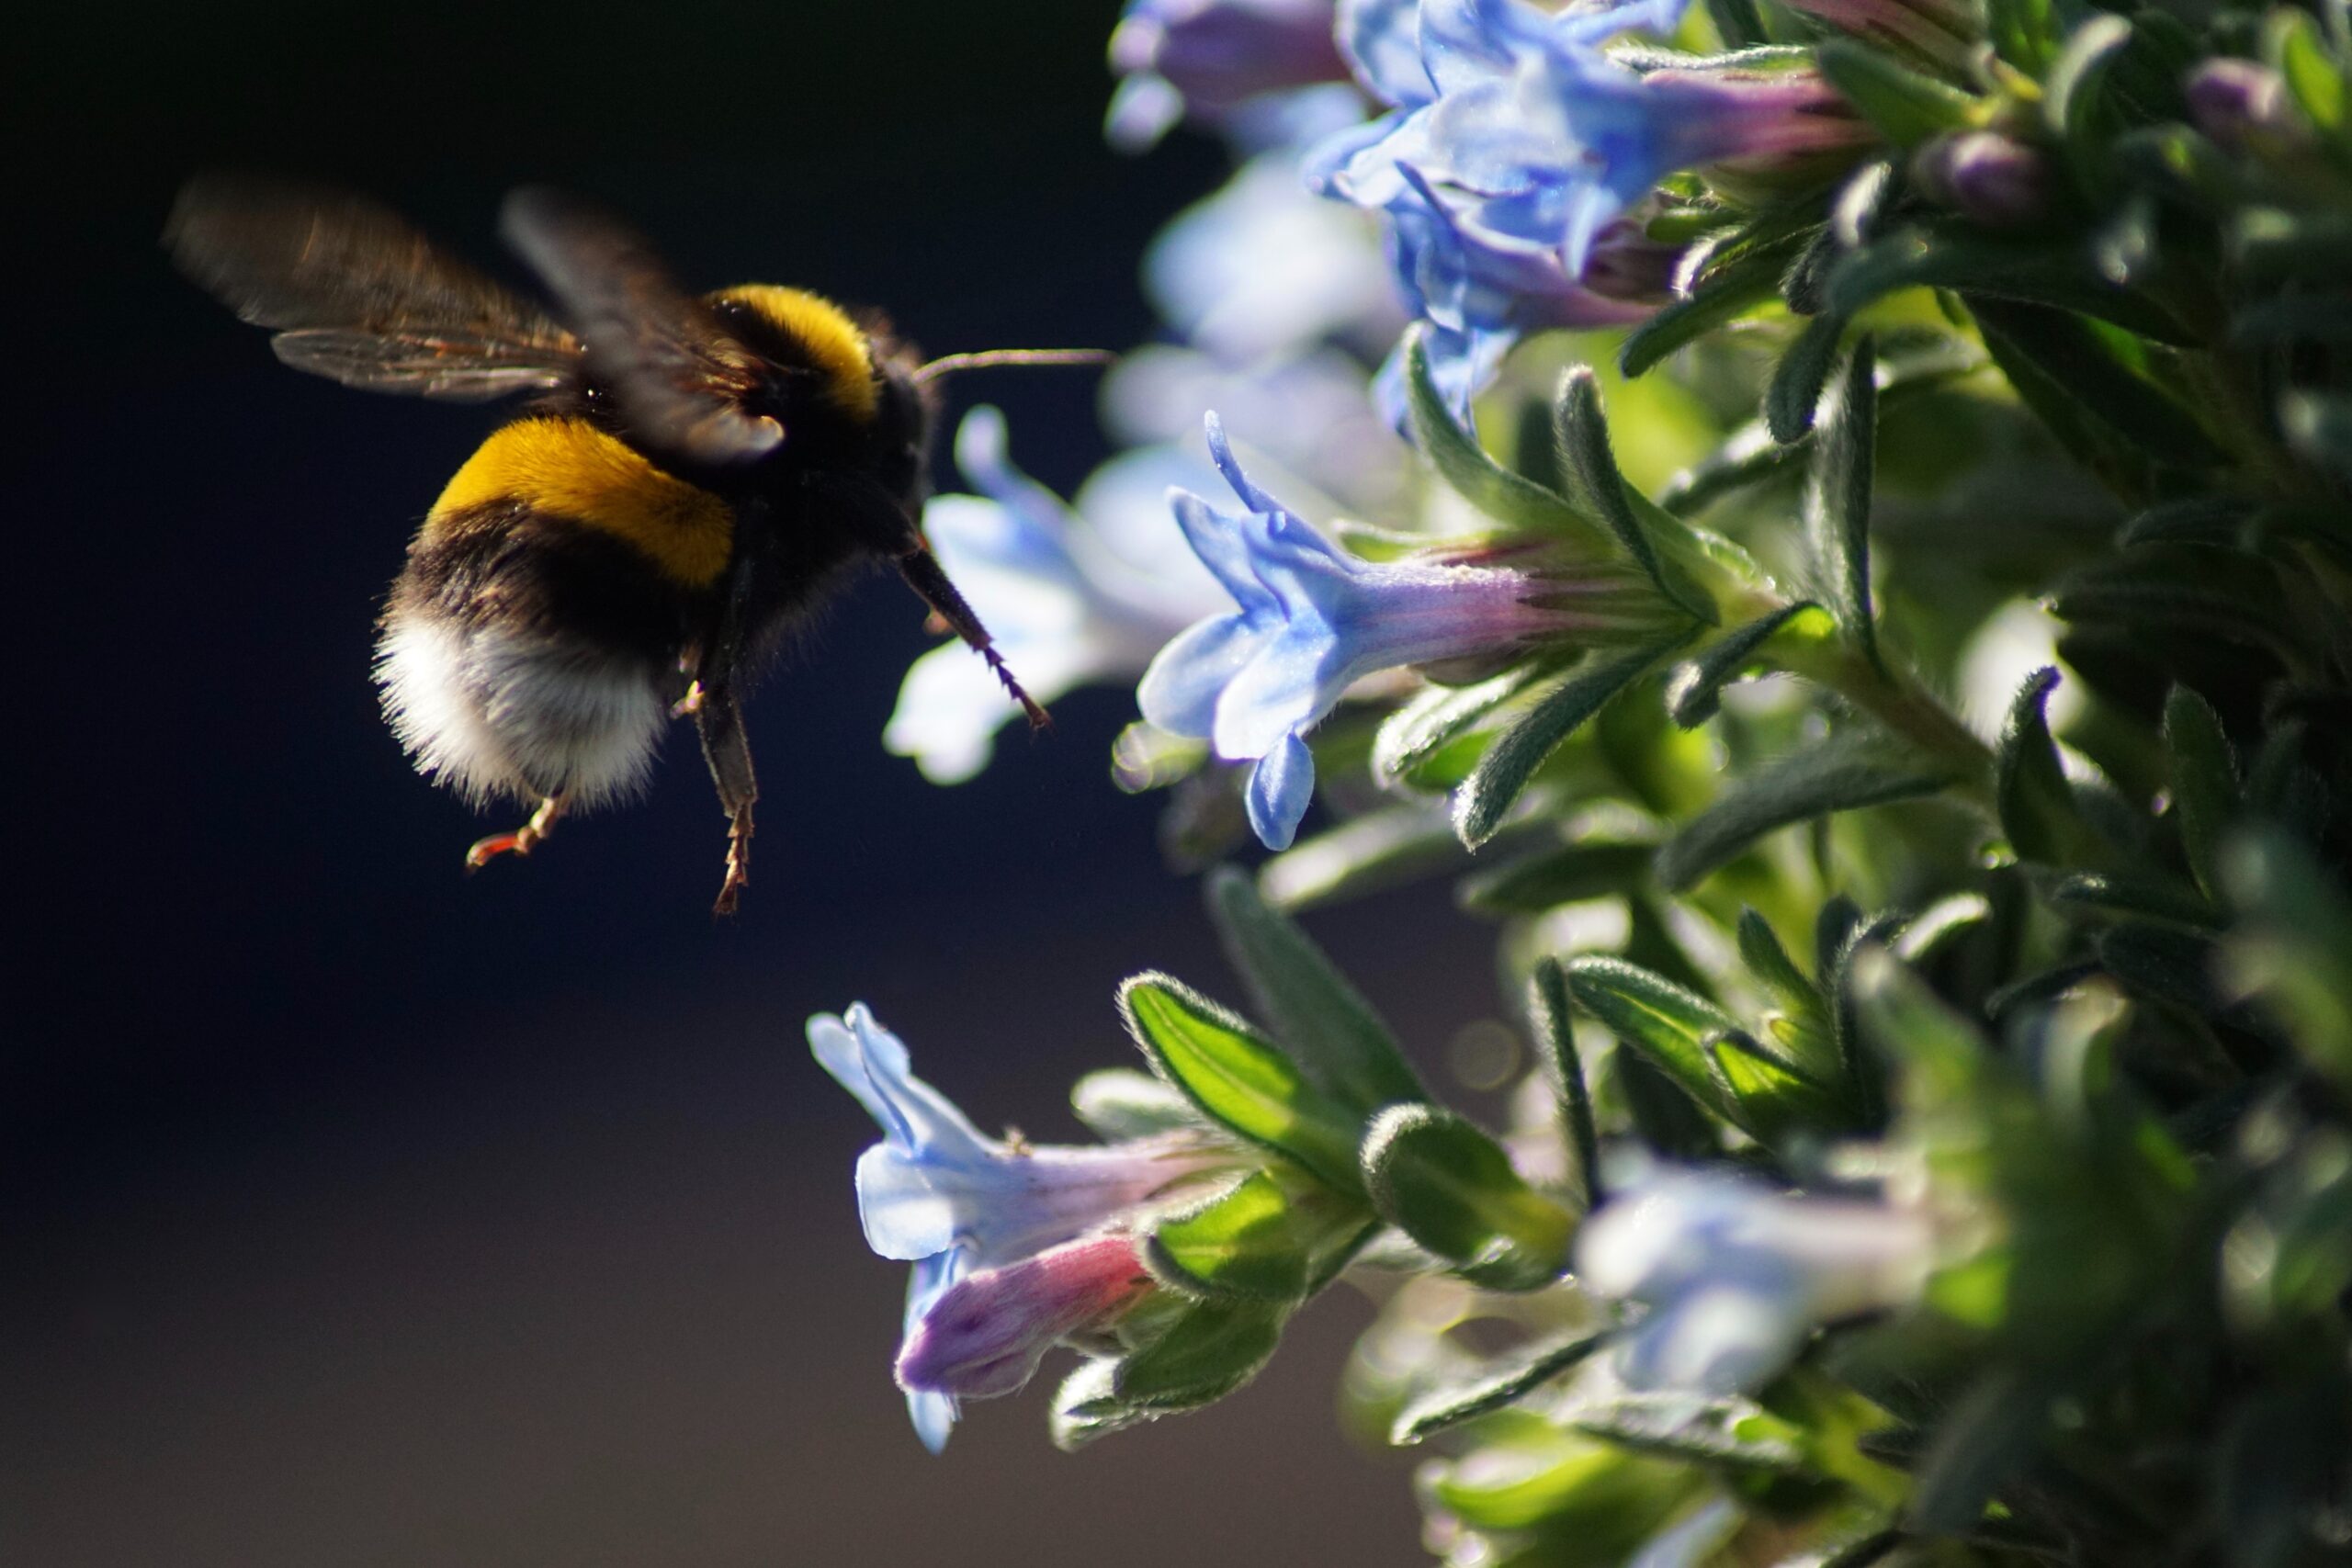 bumblebee hovering near a flower